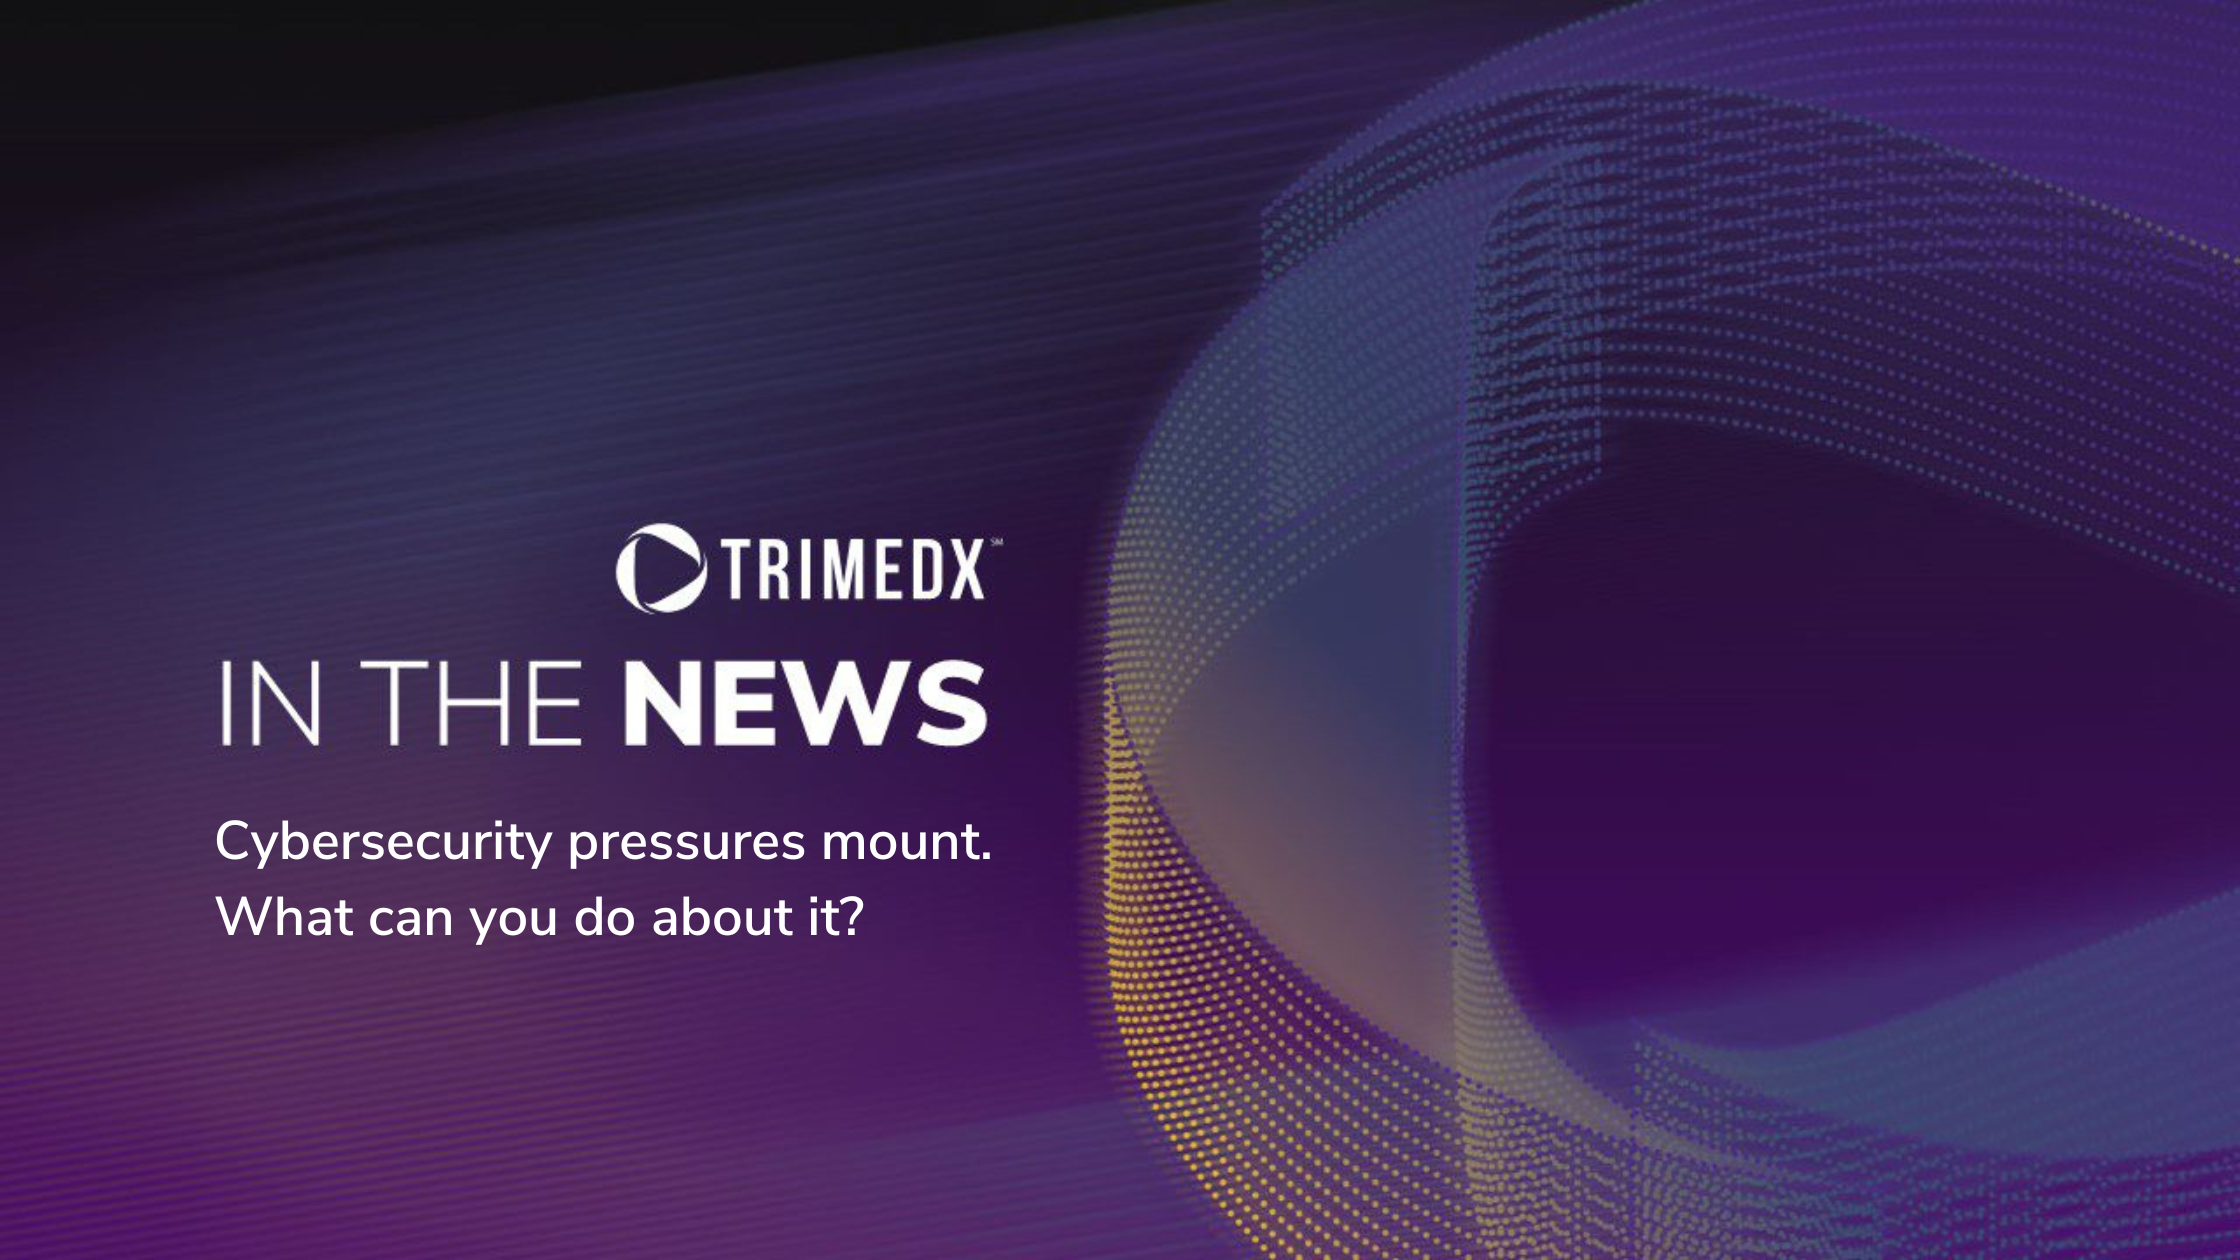 Cybersecurity pressures mount. What can you do about it? In the news with purple background